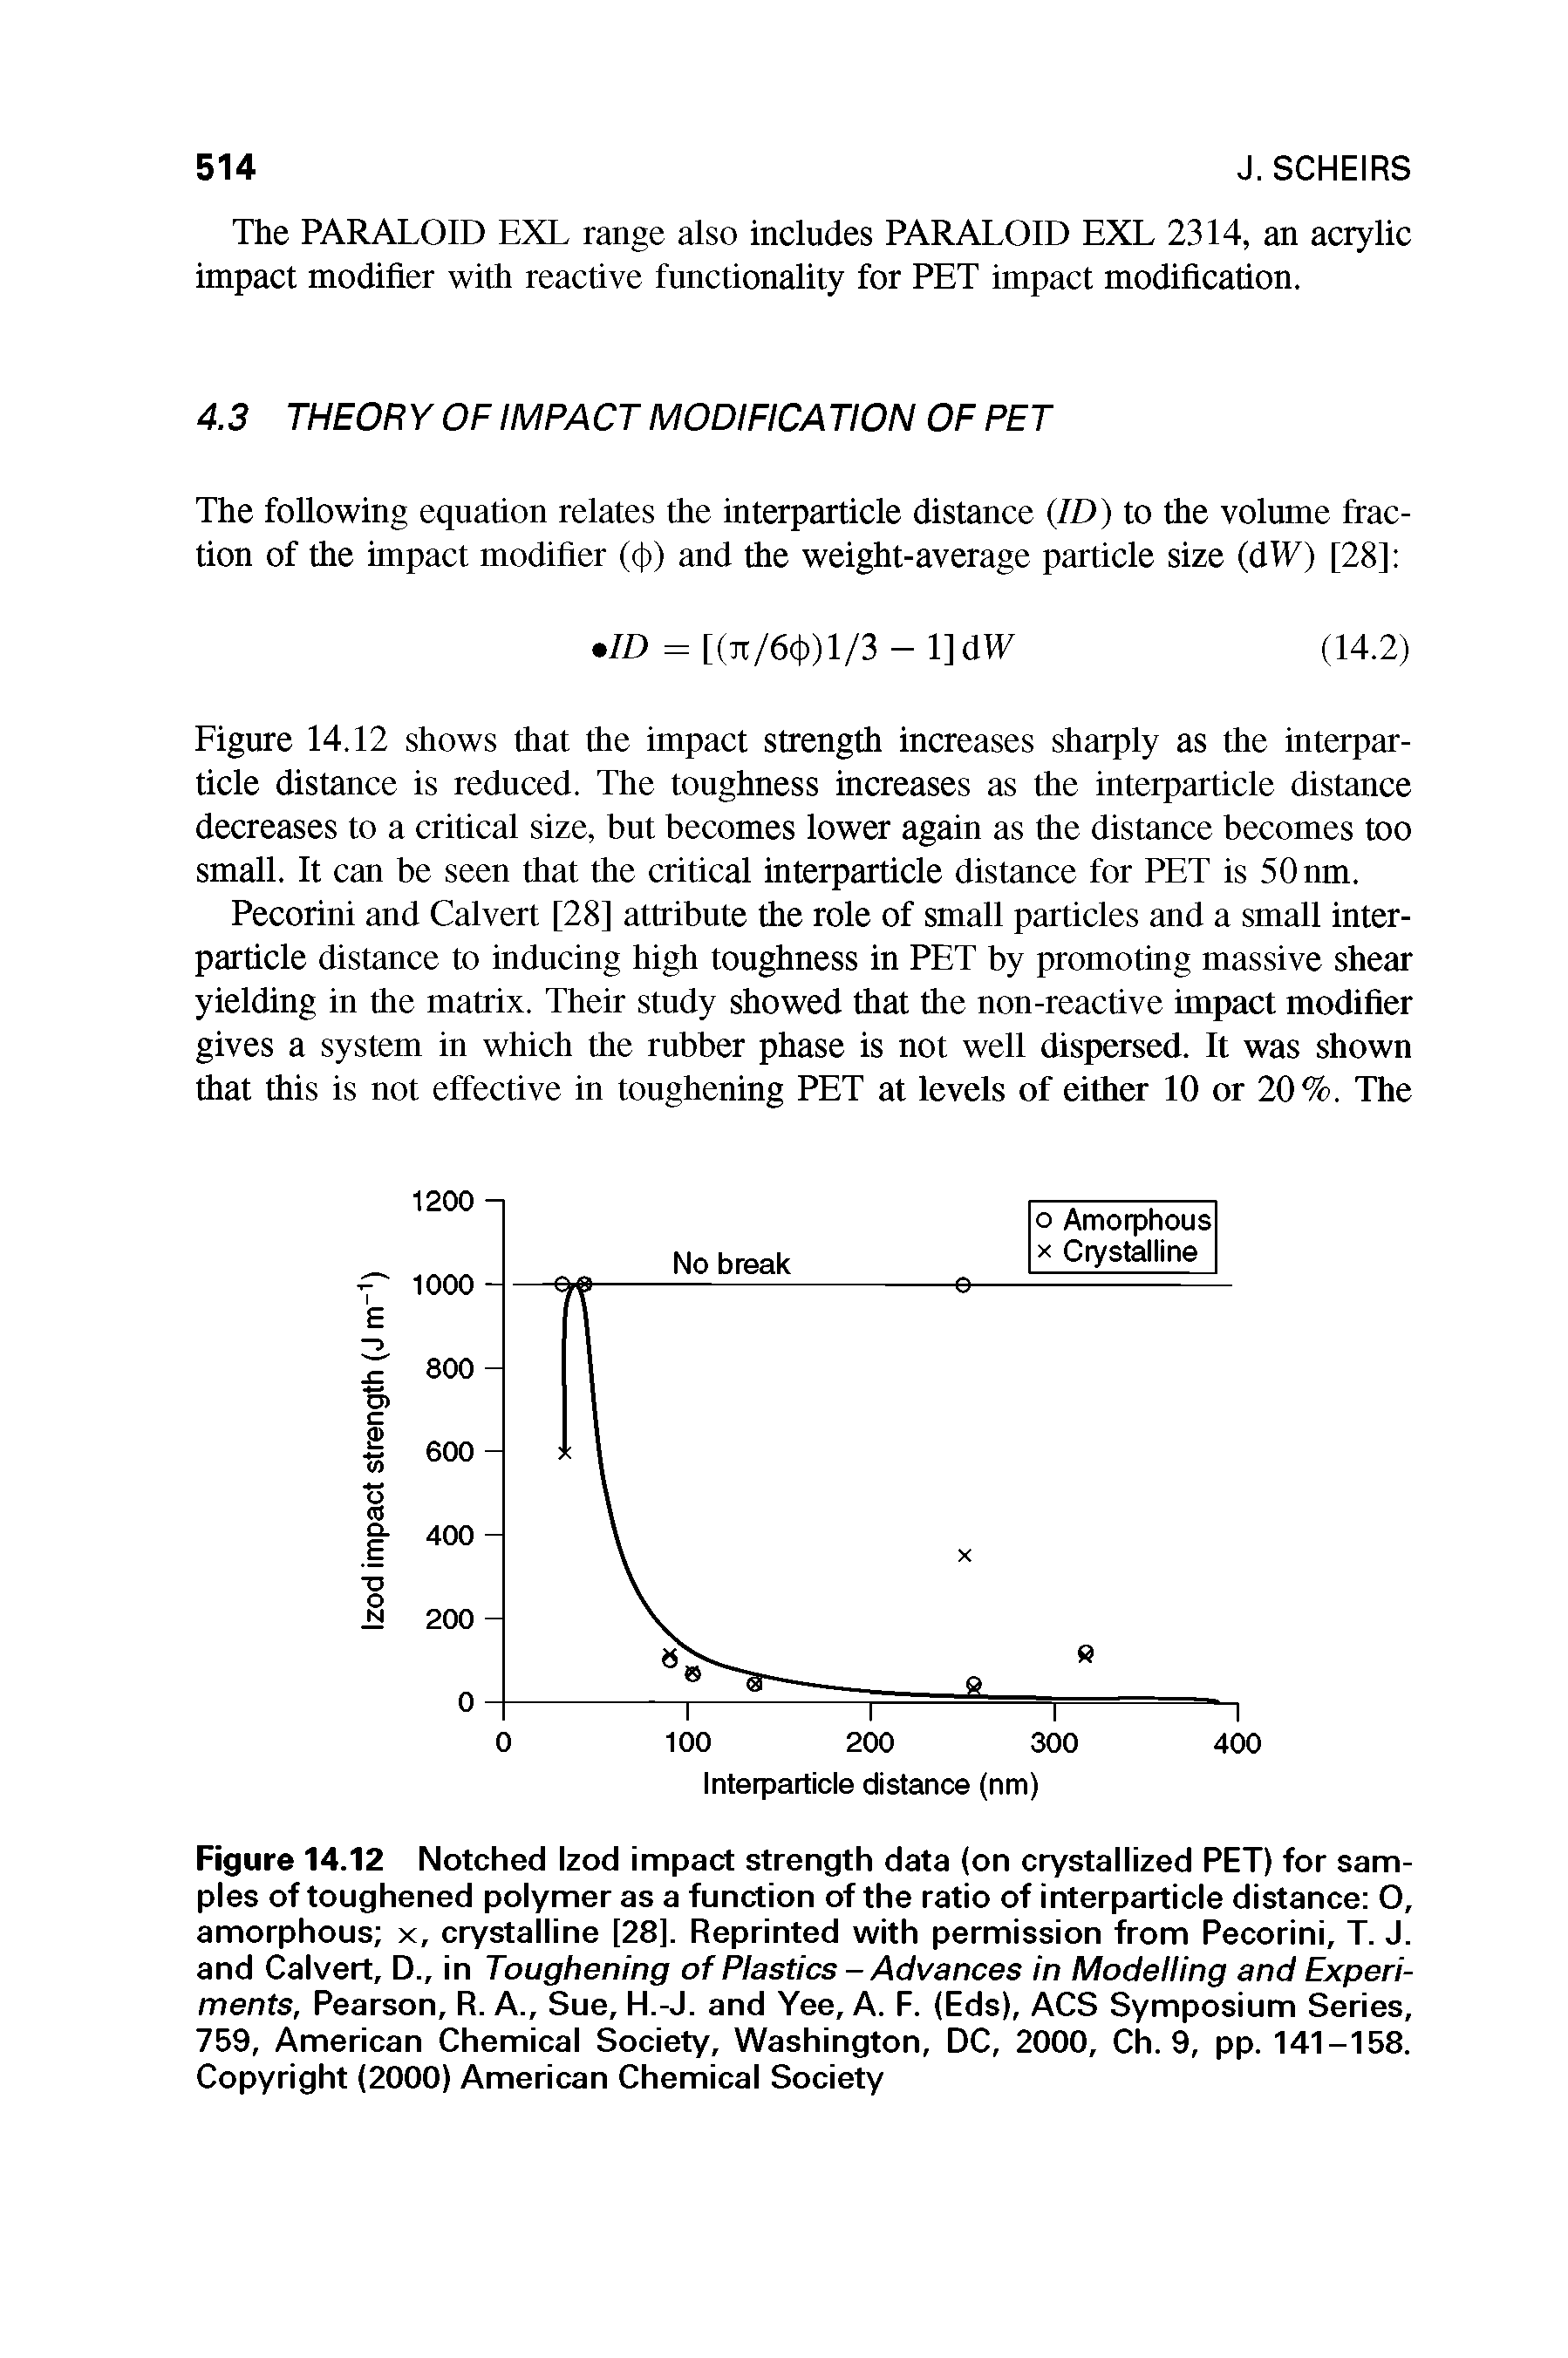 Figure 14.12 Notched Izod impact strength data (on crystallized PET) for samples of toughened polymer as a function of the ratio of interparticle distance O, amorphous x, crystalline [28]. Reprinted with permission from Pecorini, T. J. and Calvert, D., in Toughening of Plastics - Advances in Modelling and Experiments, Pearson, R. A., Sue, H.-J. and Yee, A. F. (Eds), ACS Symposium Series, 759, American Chemical Society, Washington, DC, 2000, Ch. 9, pp. 141-158. Copyright (2000) American Chemical Society...